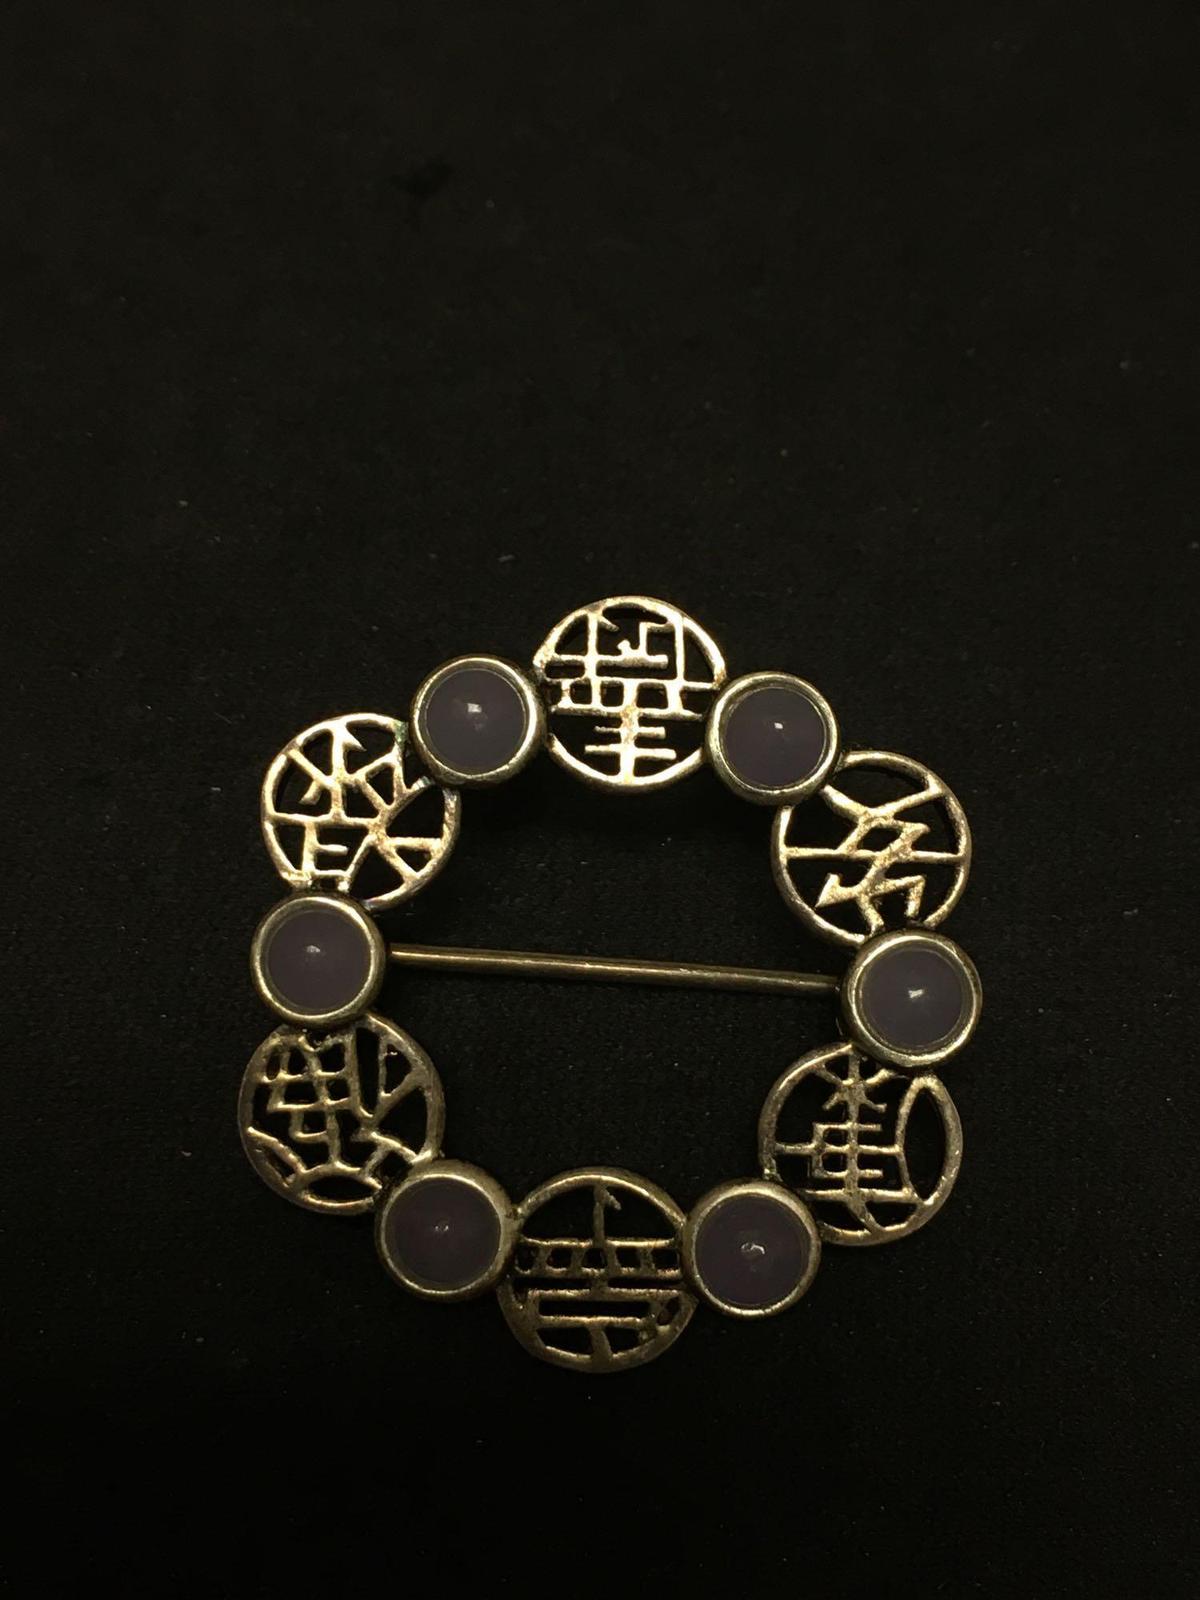 Round 1.5in Diameter Asian Character Motif w/ Lavender Jade Cabochon Accents Sterling Silver Brooch